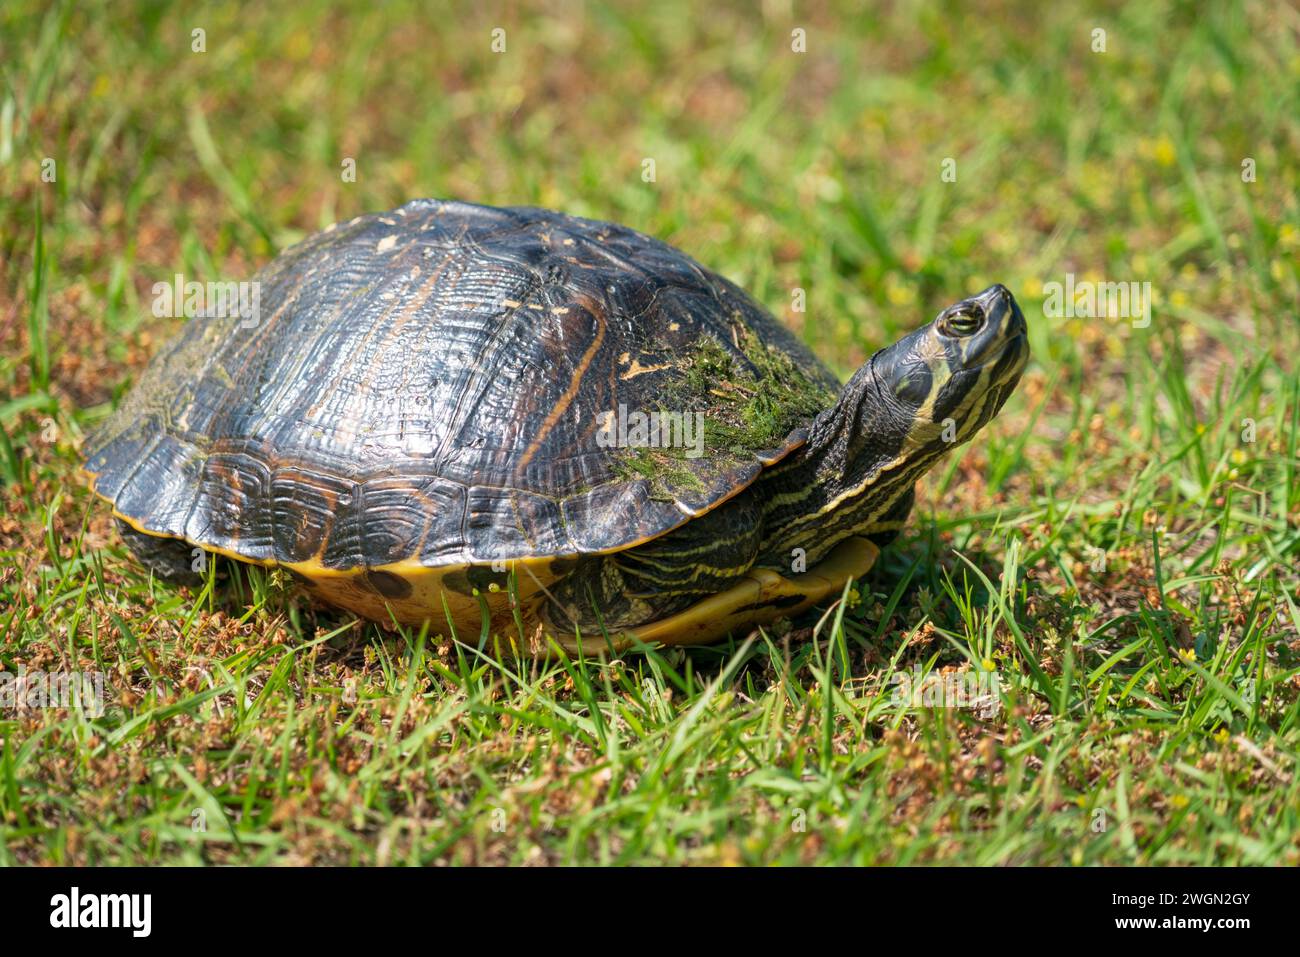 A Cute Turtle in the Grass at Atalaya Castle Stock Photo